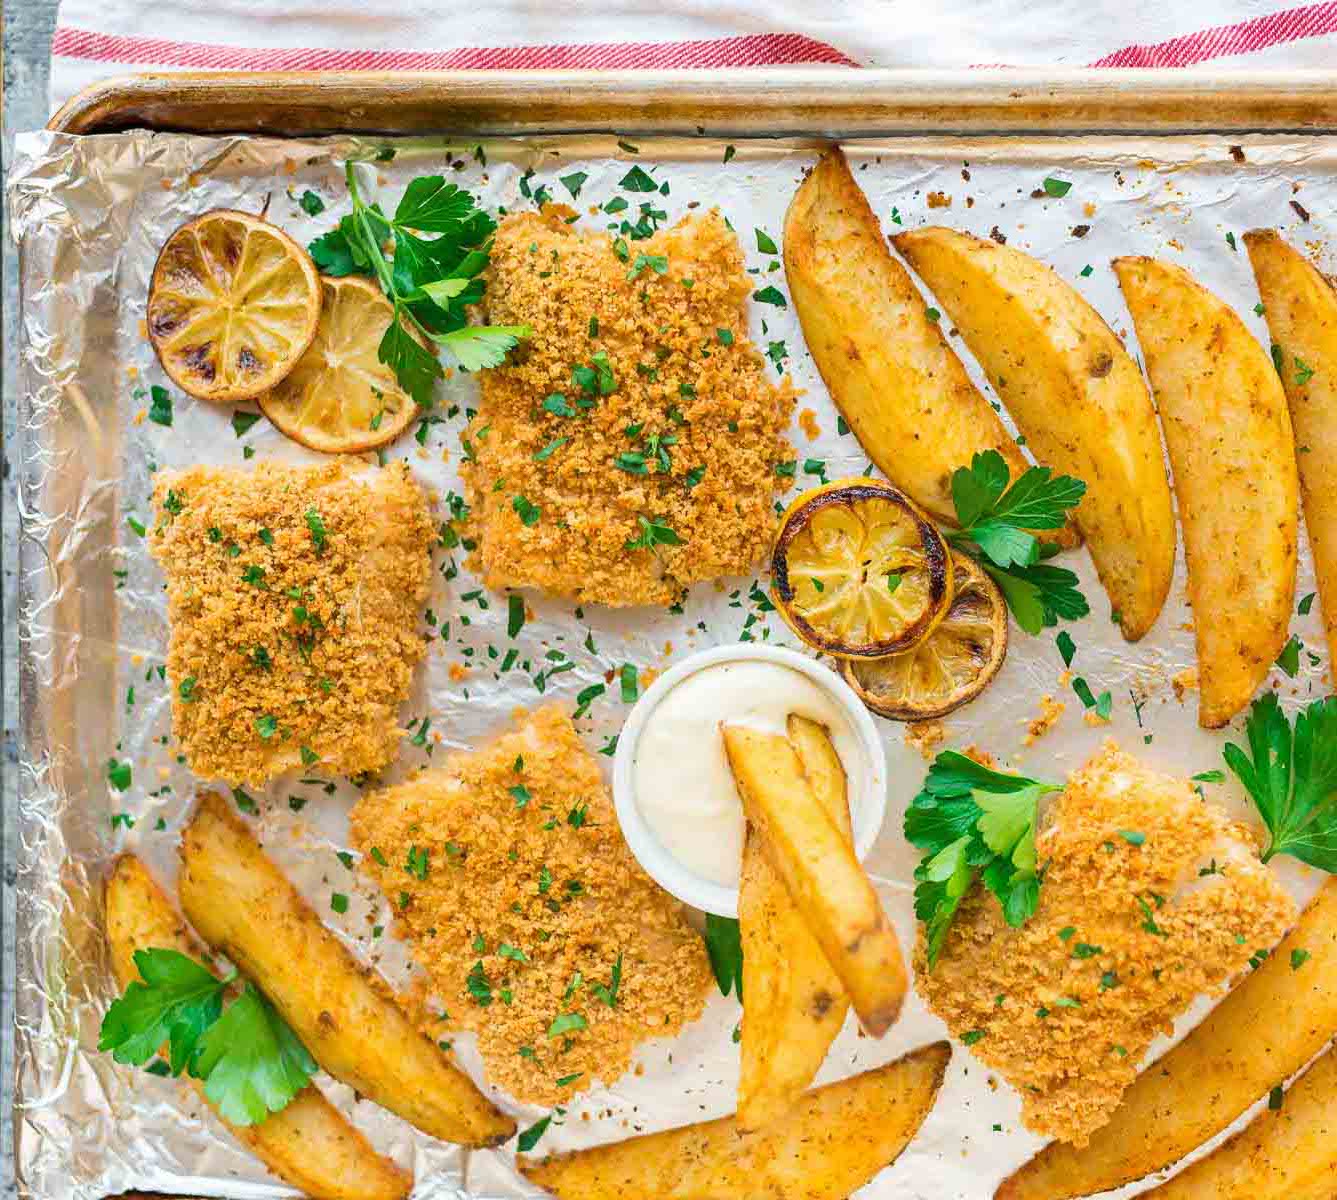 Baked Fish and Chips